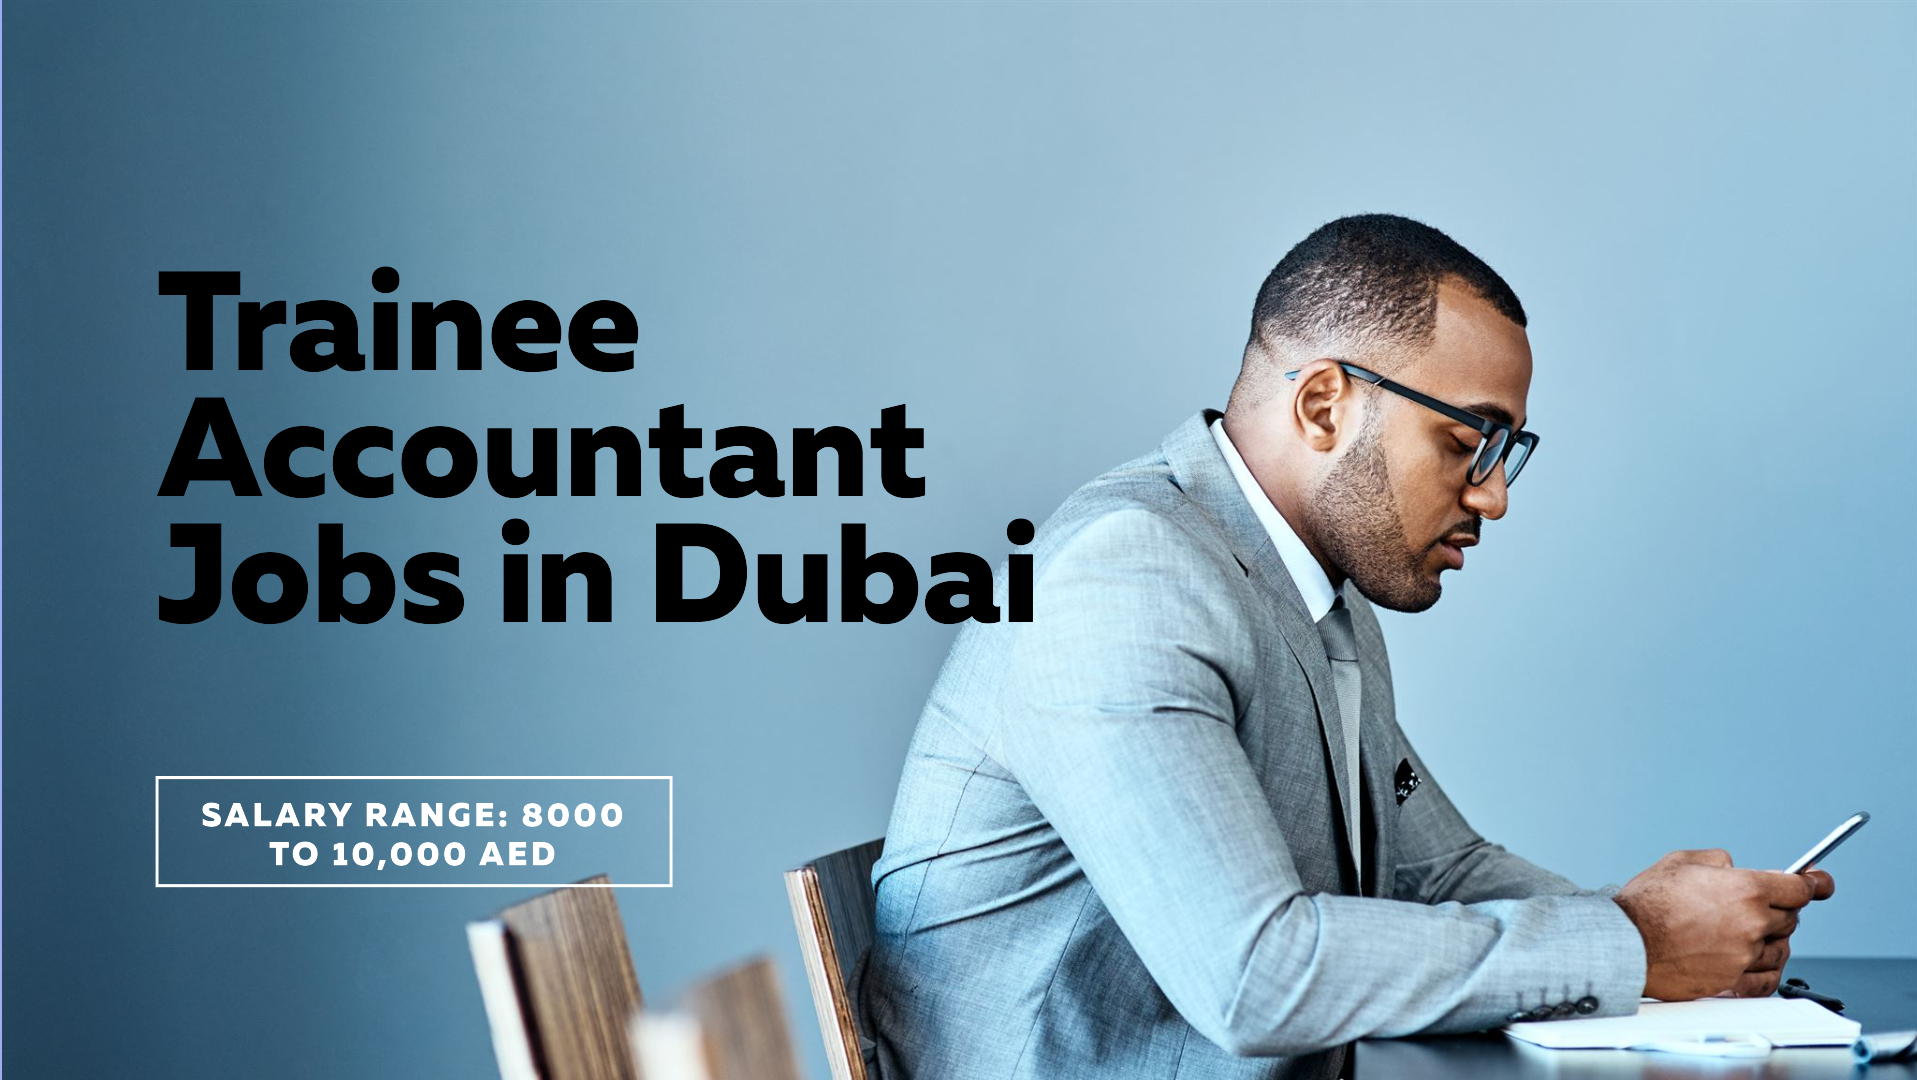 Accountant jobs in Dubai with salary 8000 to 10,000 AED (Trainee)